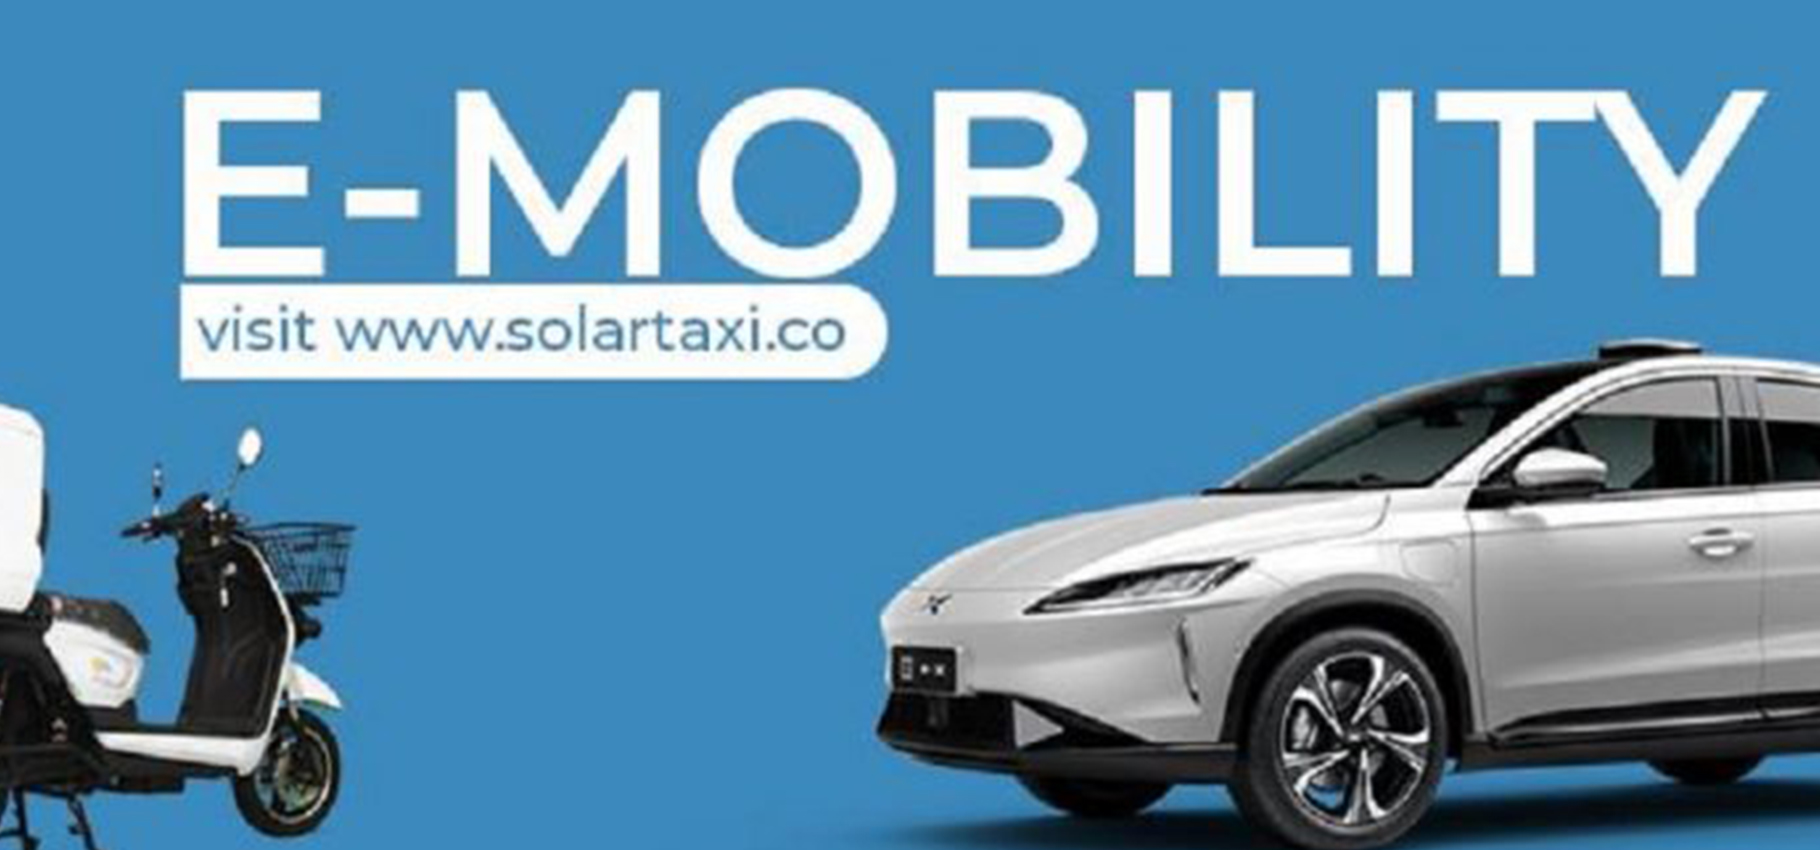 Ghana’s SolarTaxi secures funding from Persistent to scale offering